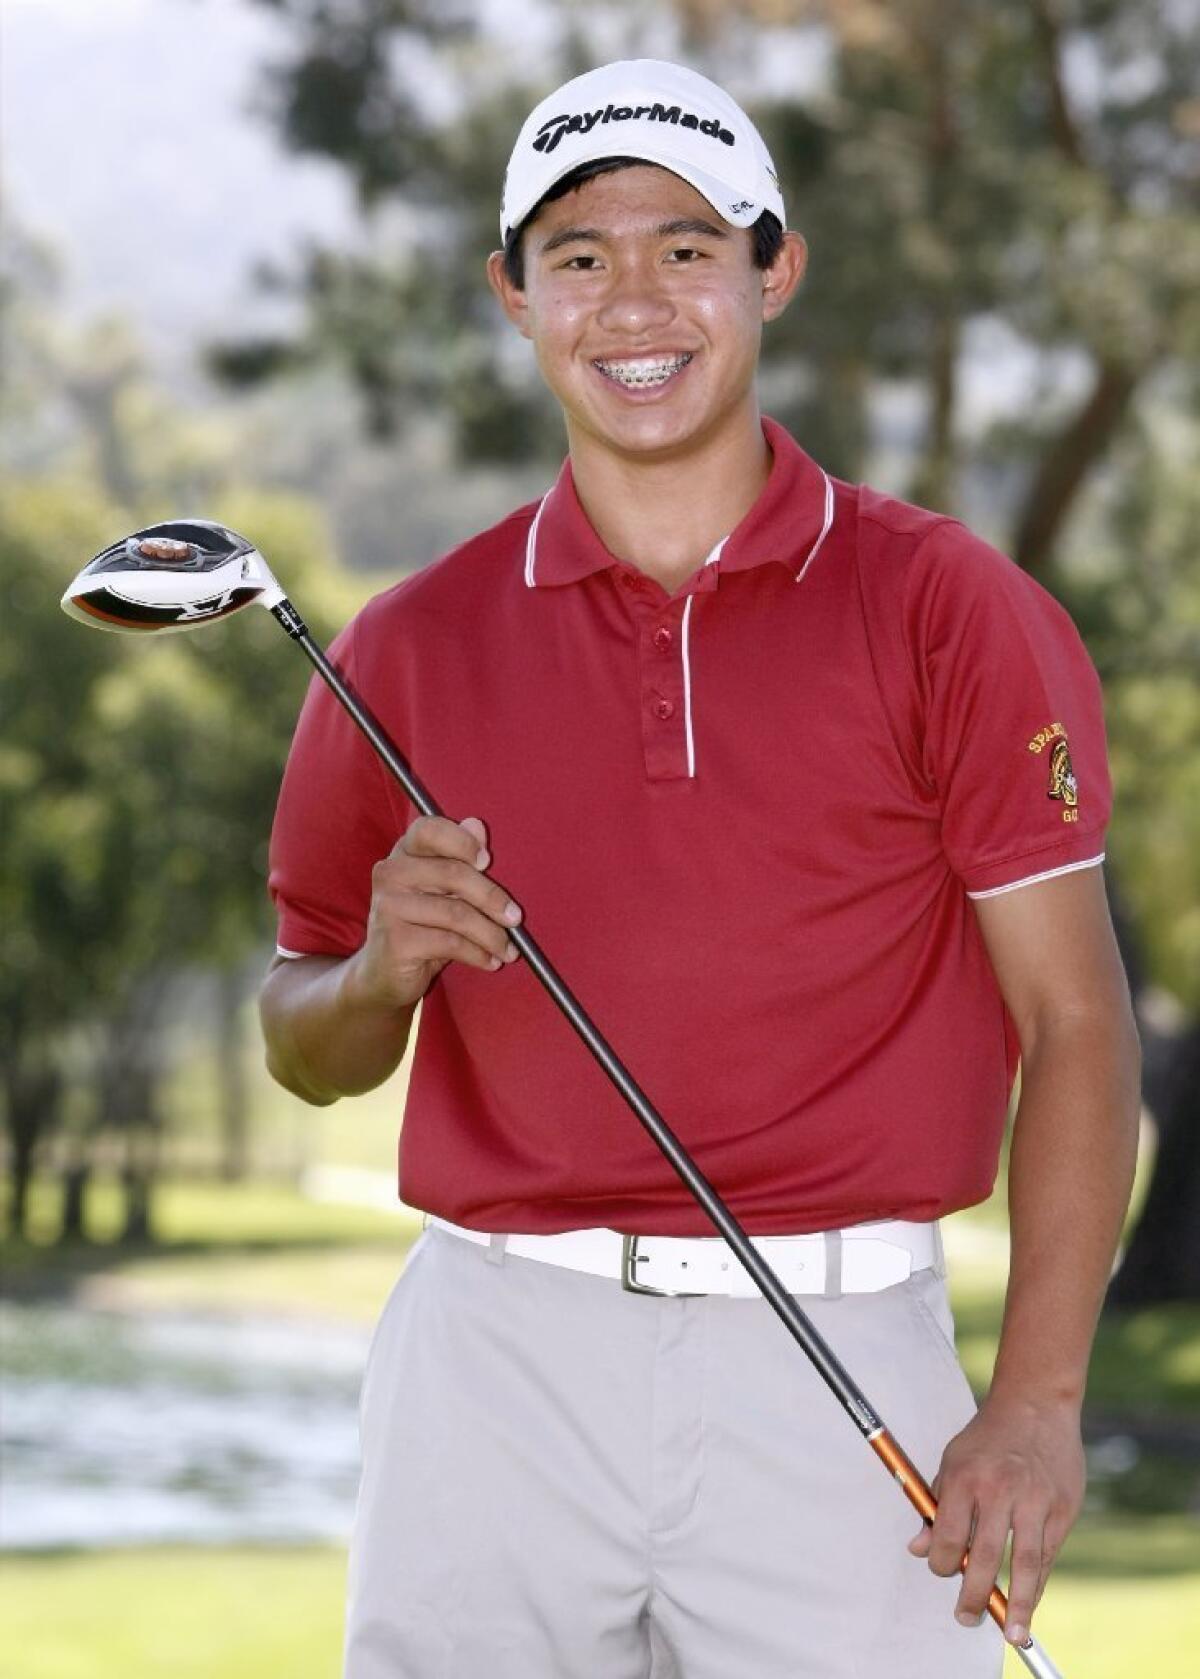 ARCHIVE PHOTO: La Cañada High's Collin Morikawa picked up his first national victory in the Western Junior competition.